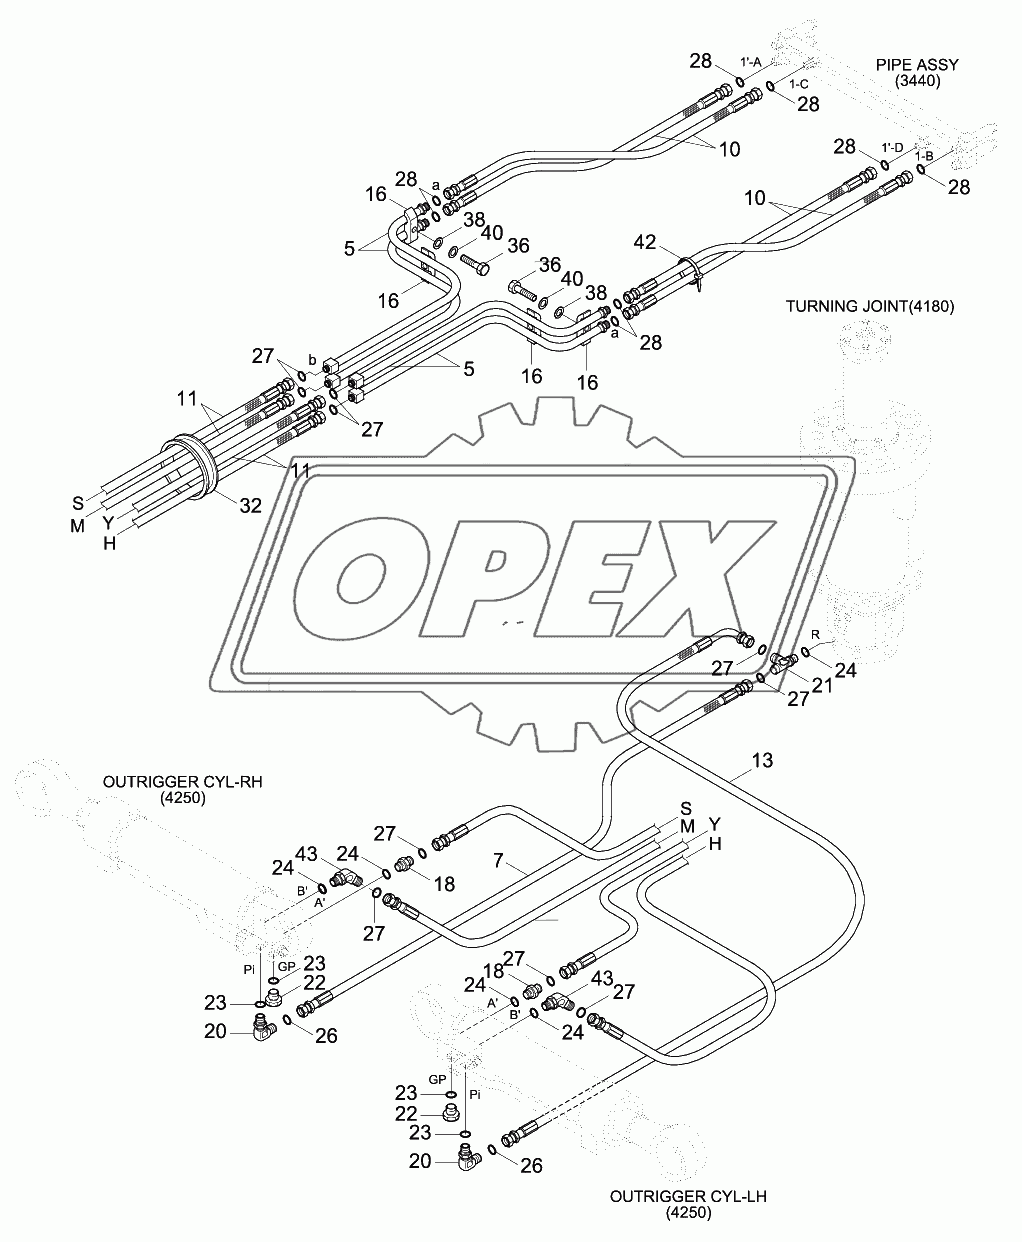 LOWER HYD PIPING 2(4 OUTRIGGER, -#0014)